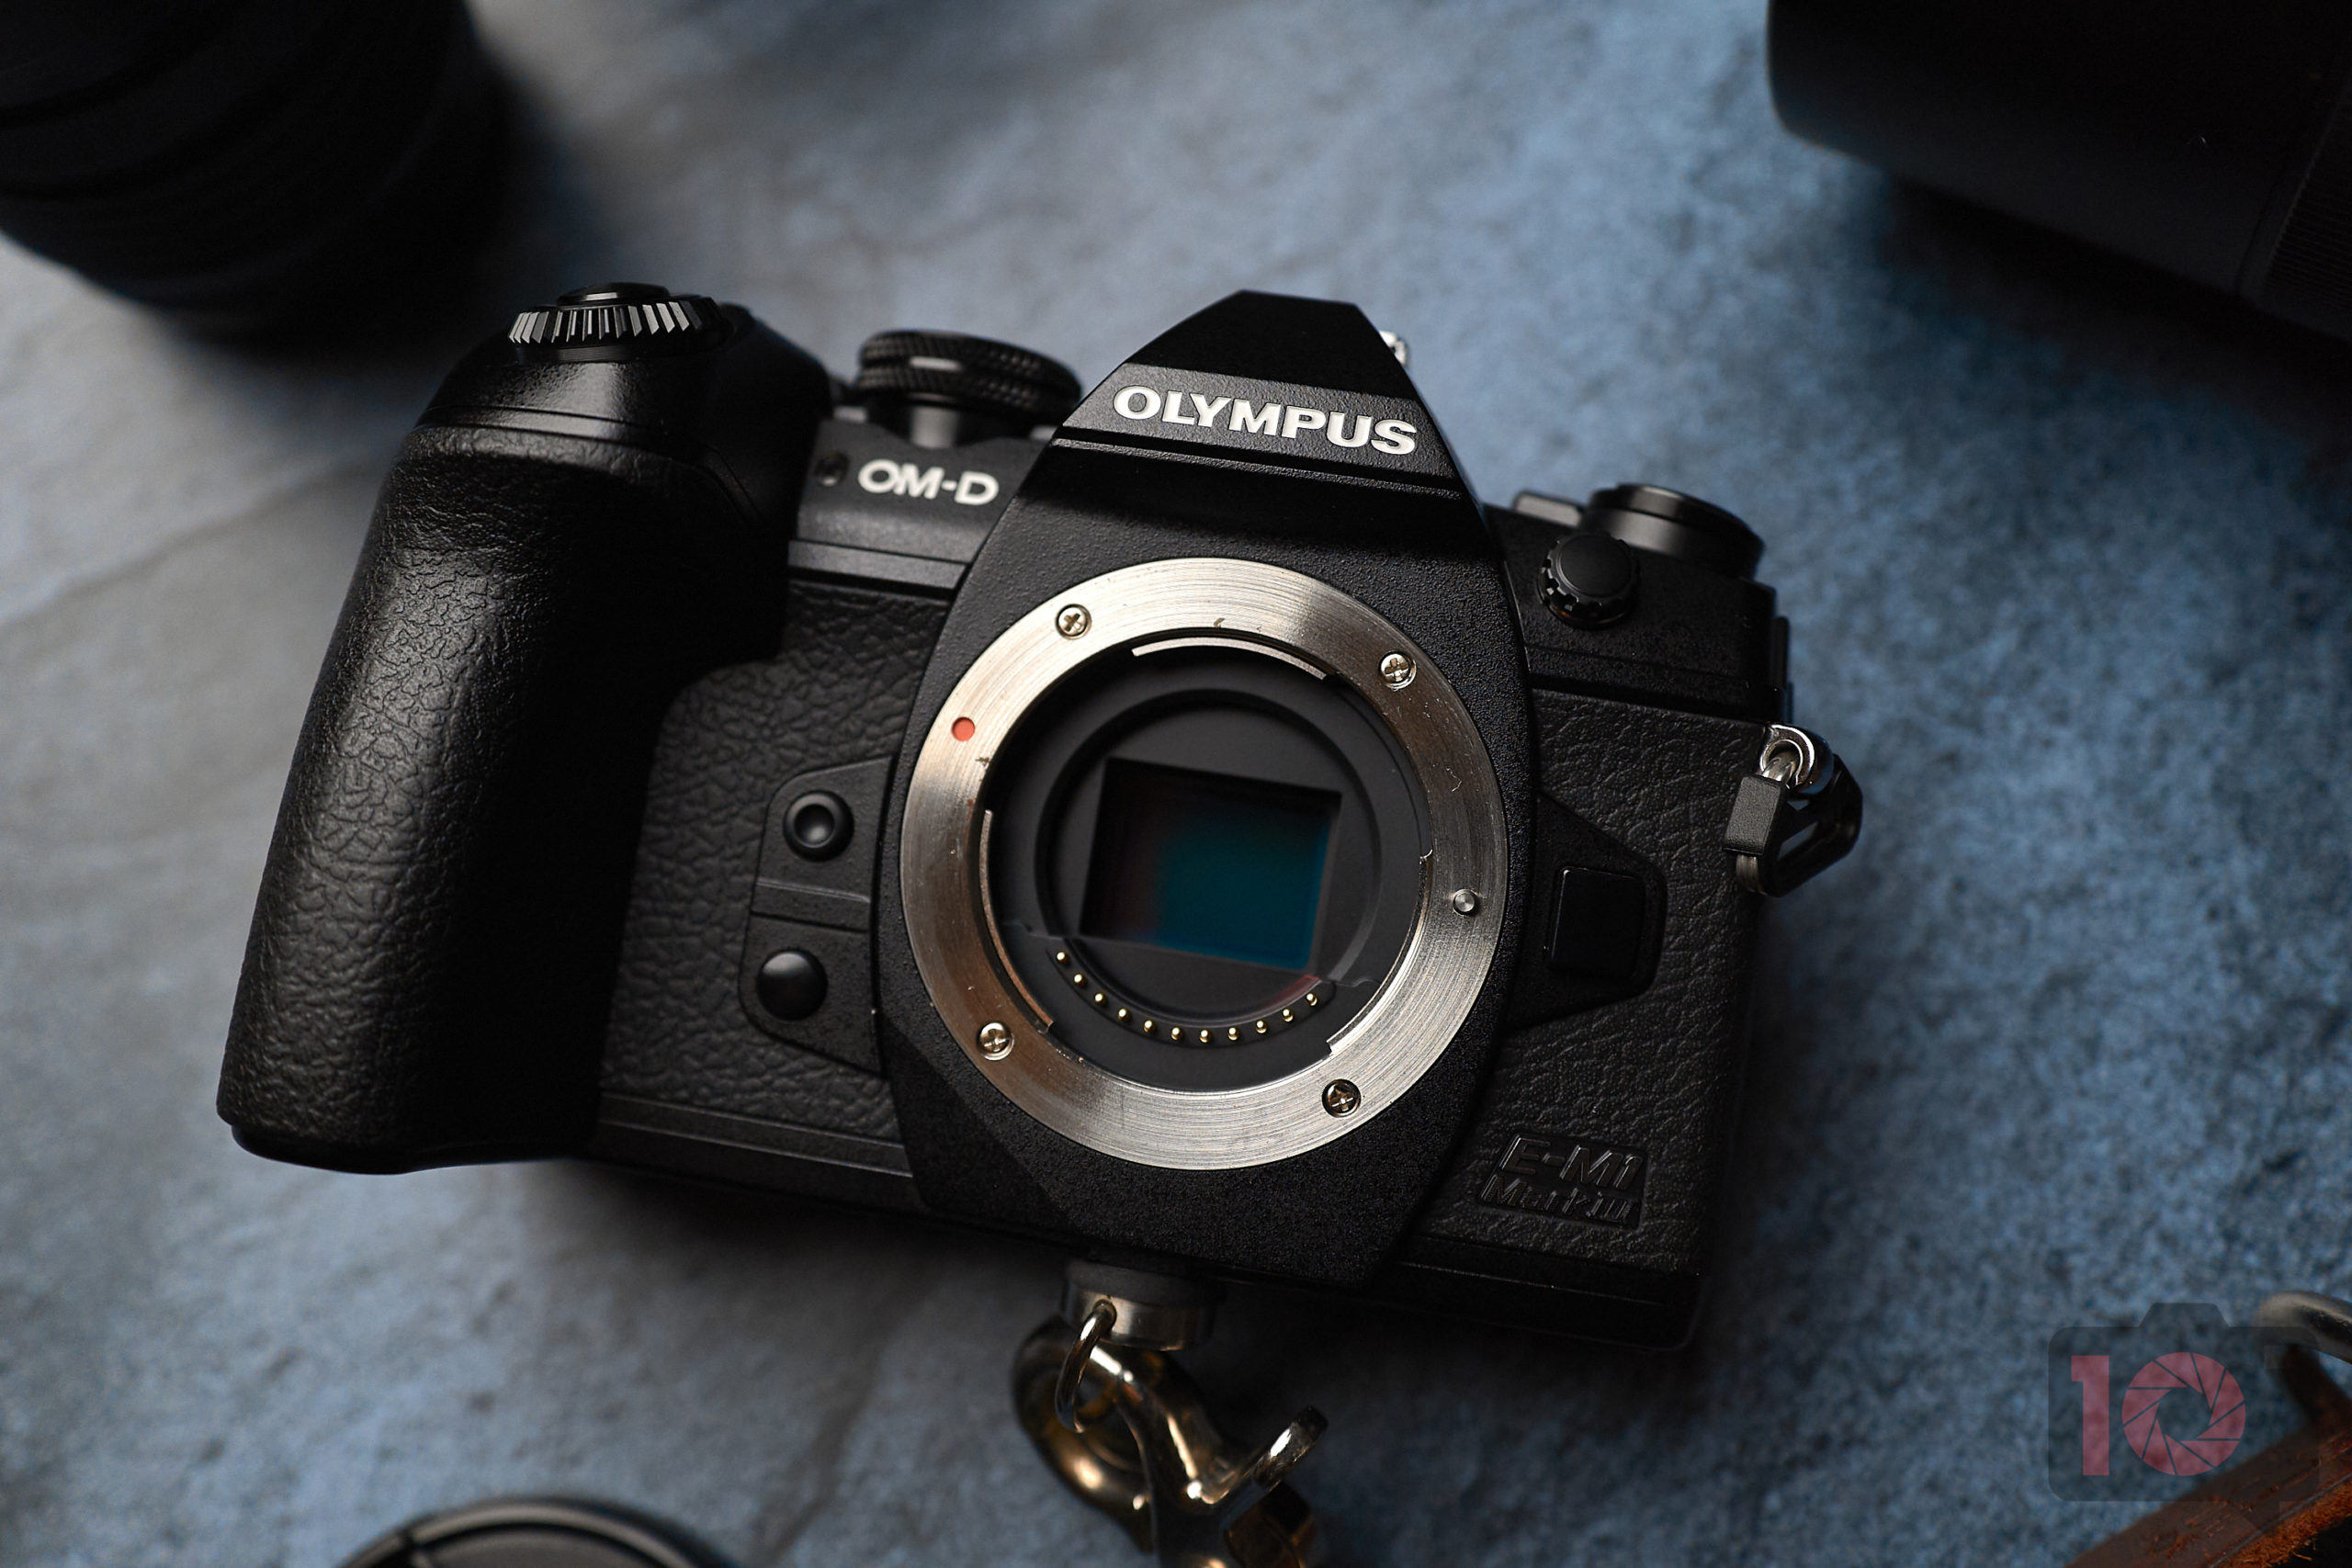 Chris Gampat The Phoblographer Olympus OMD EM1 Mk III Review product images 41-125s6400 1